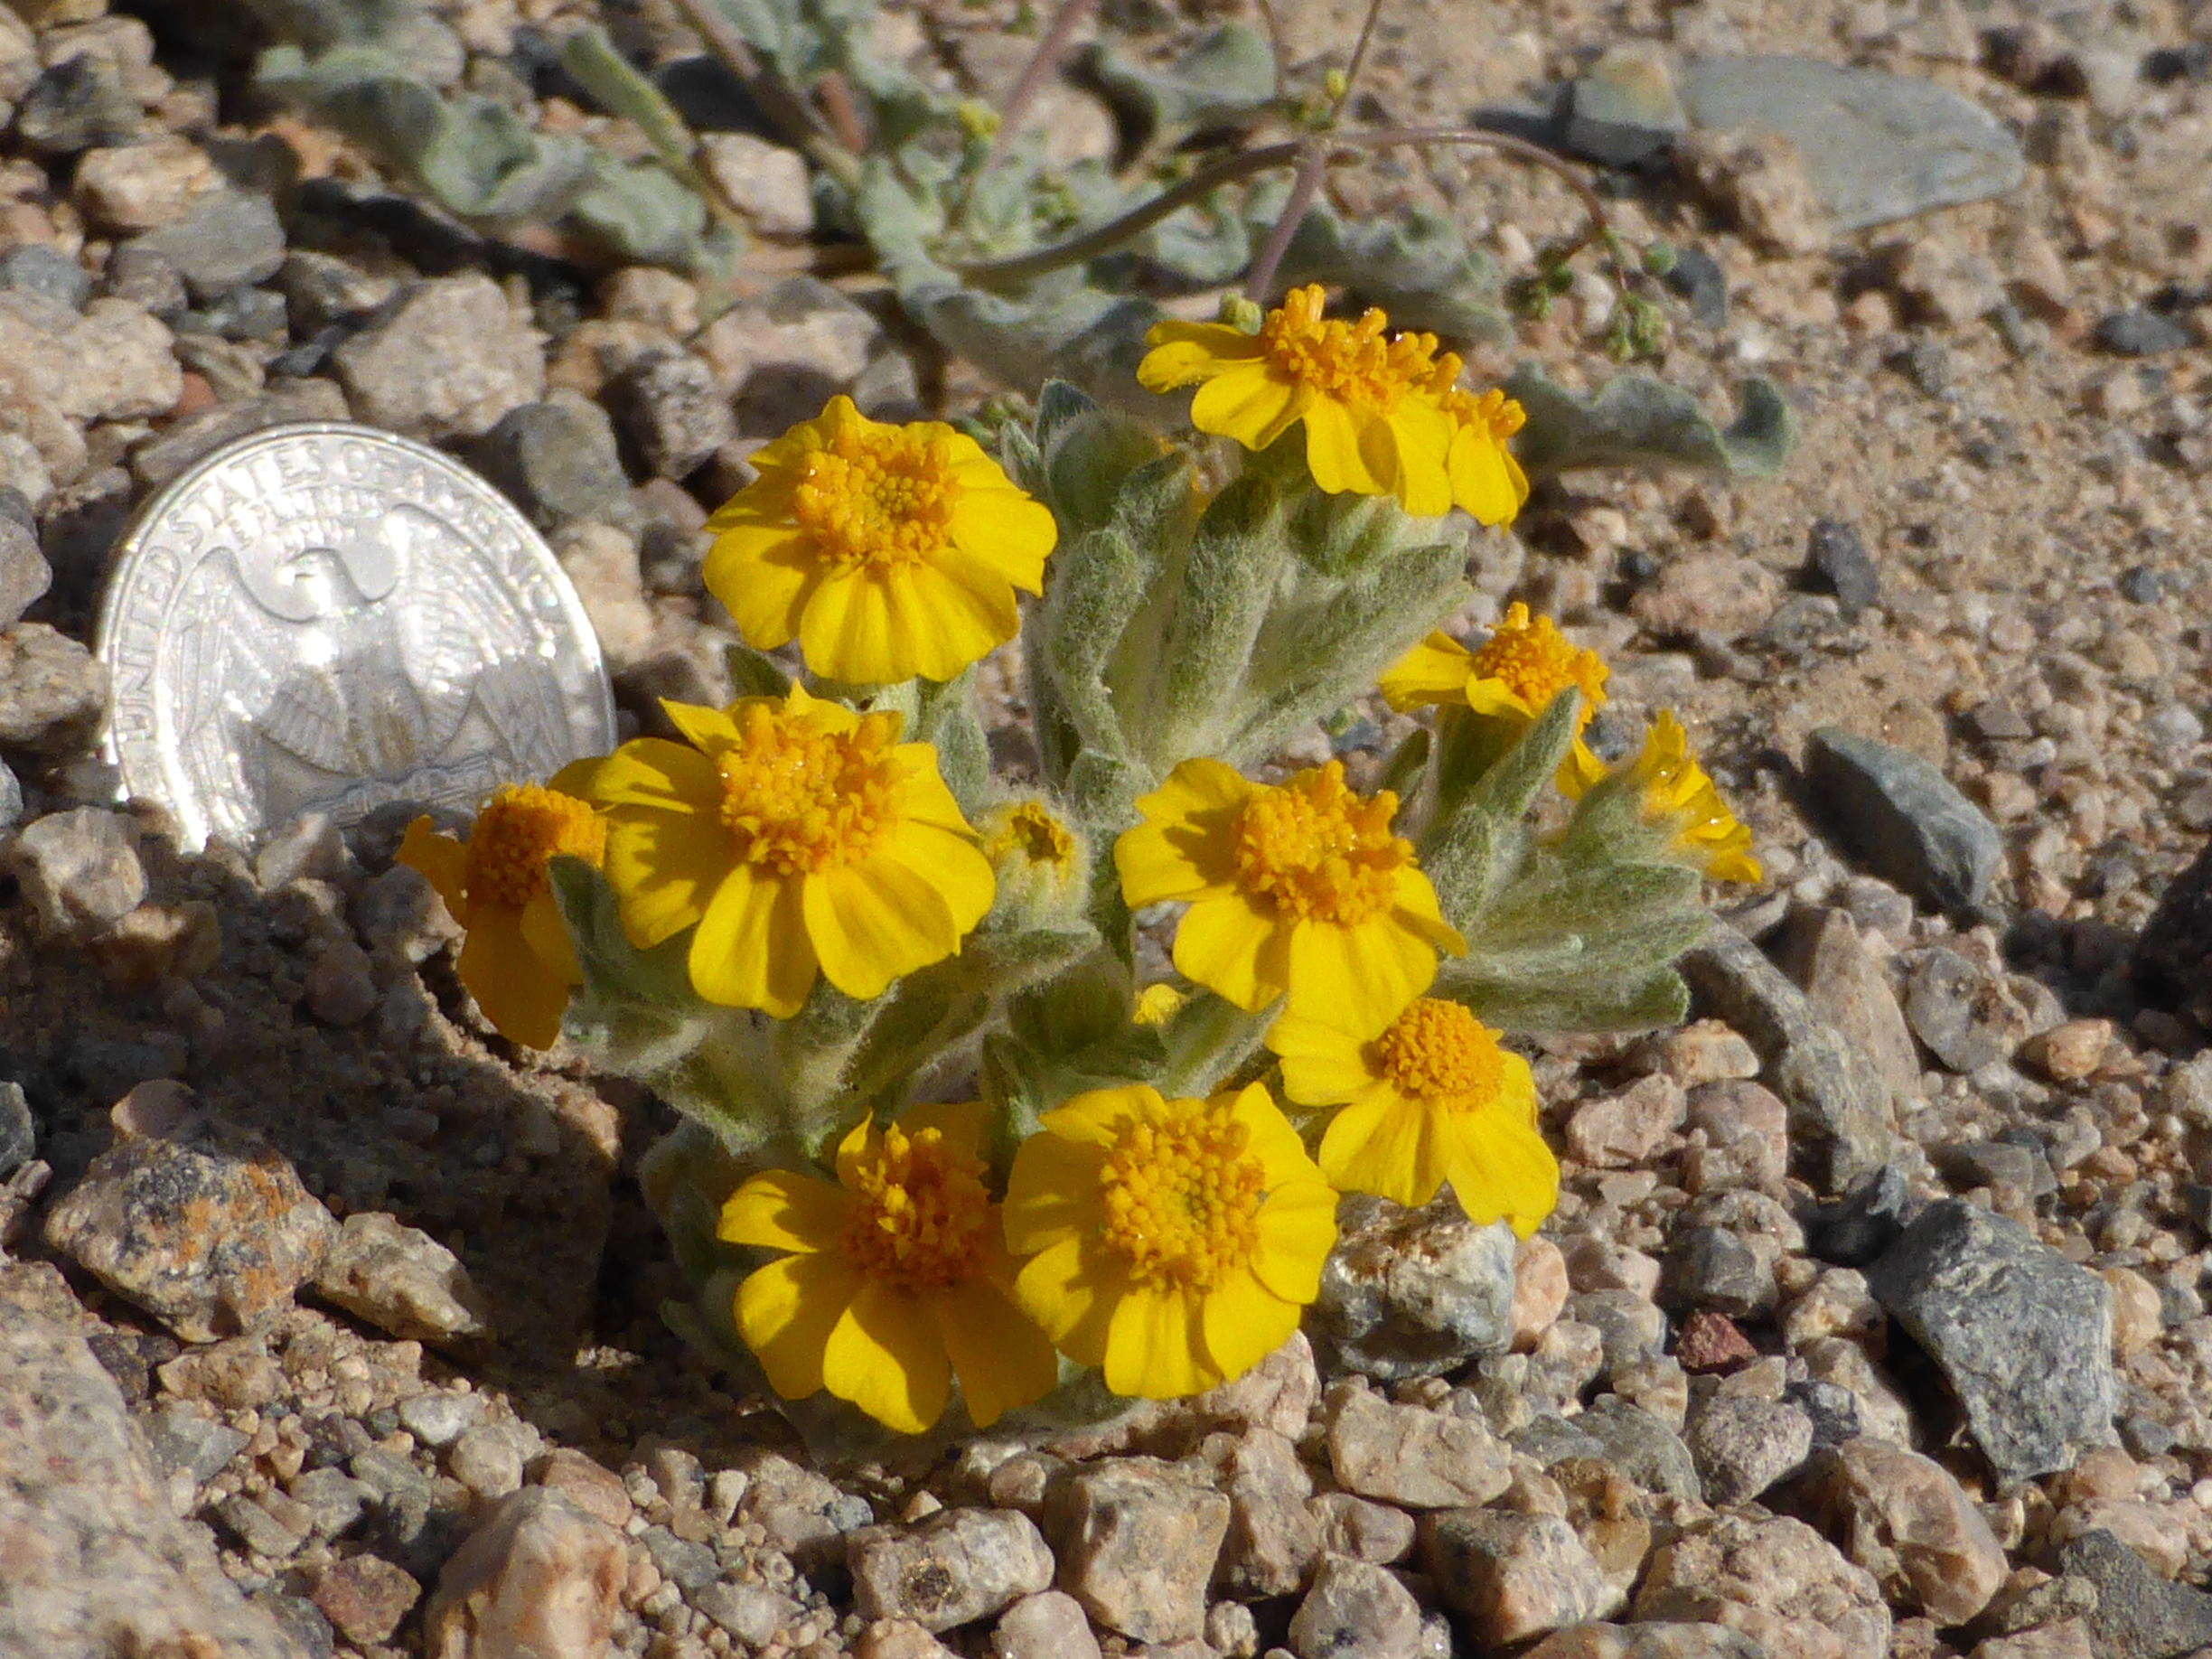 A closeup of a small yellow flower, the common Wallace's woolly daisy, nest to a quarter in Mojave Desert 